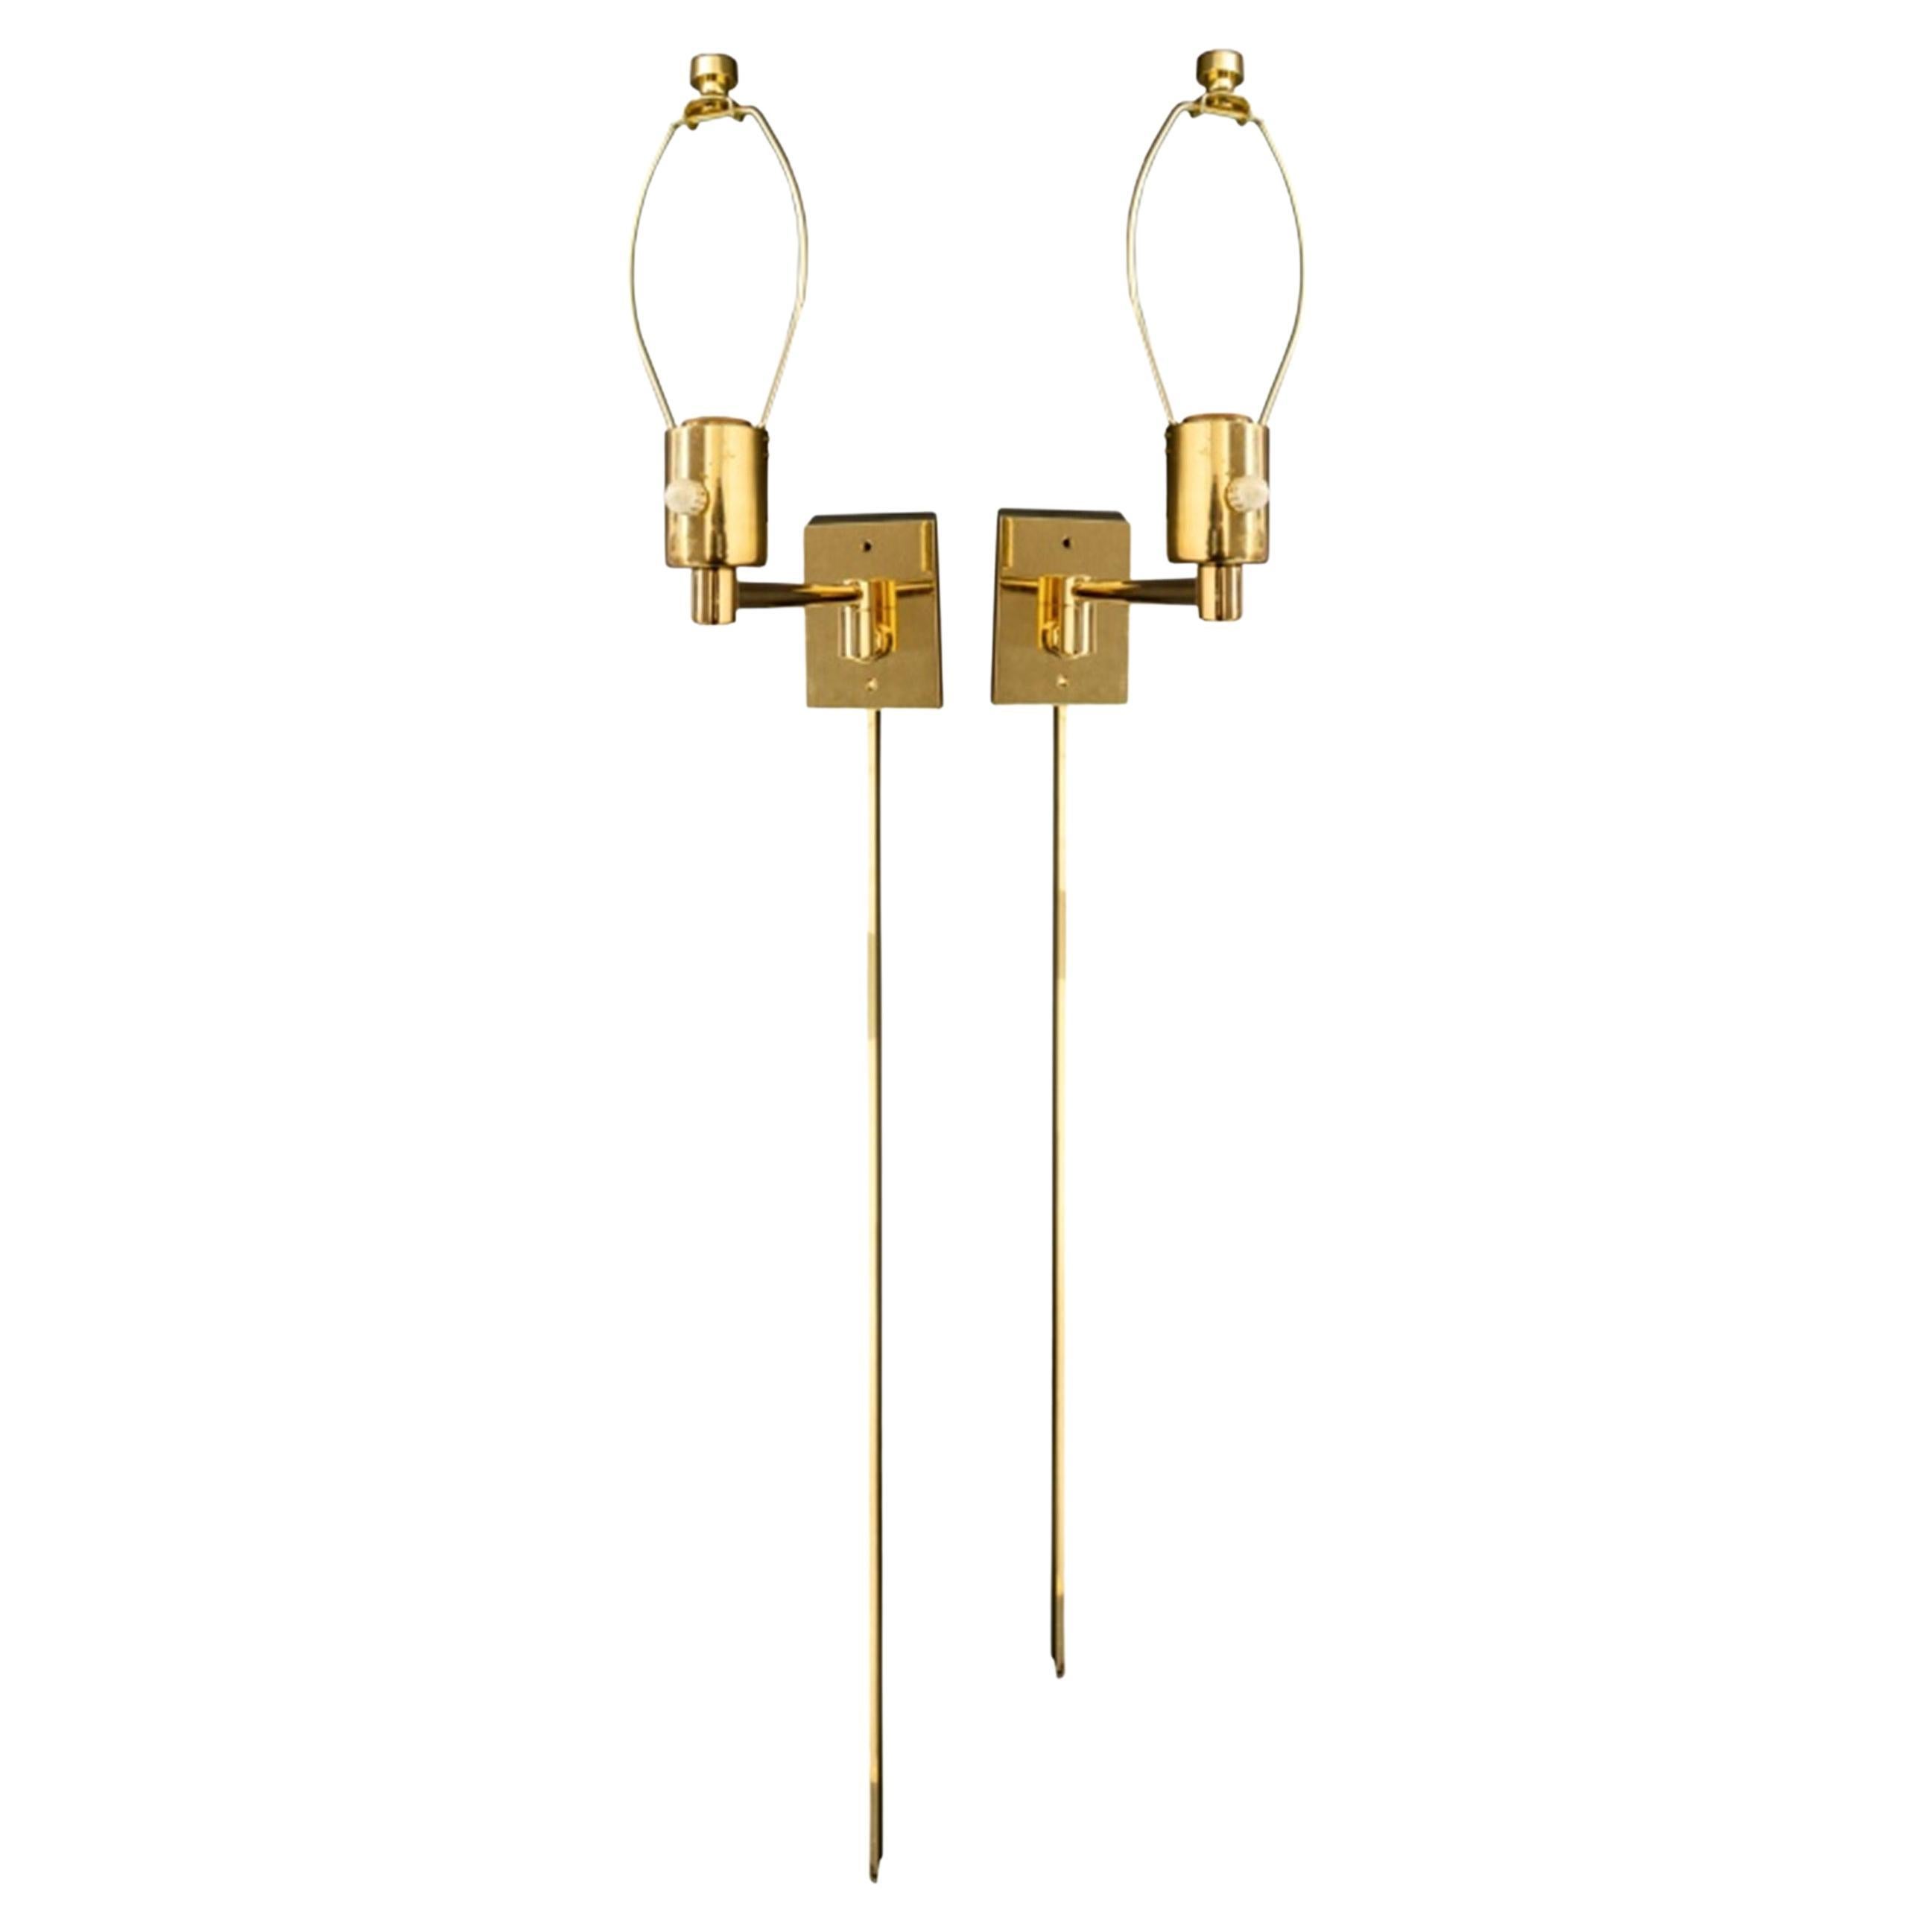 George Hansen Brass Swing Arm Lamps for Hinson, Pair